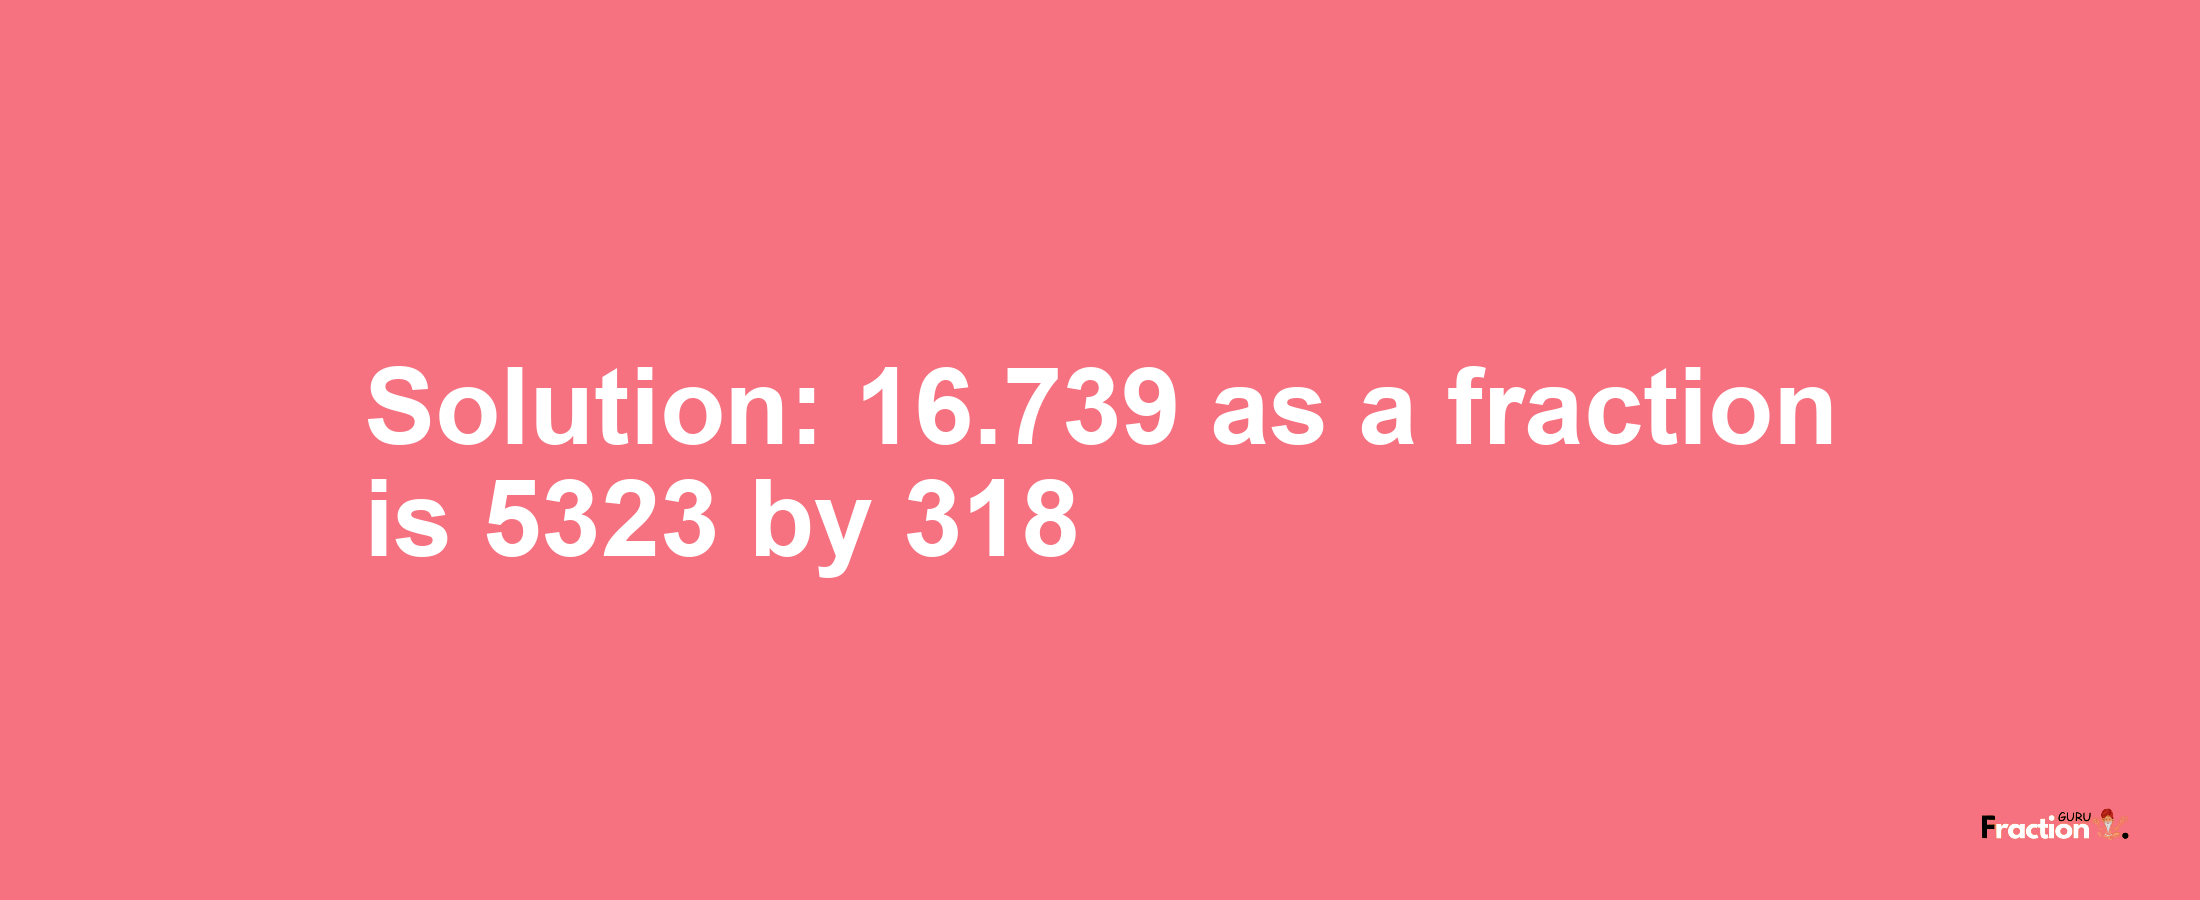 Solution:16.739 as a fraction is 5323/318